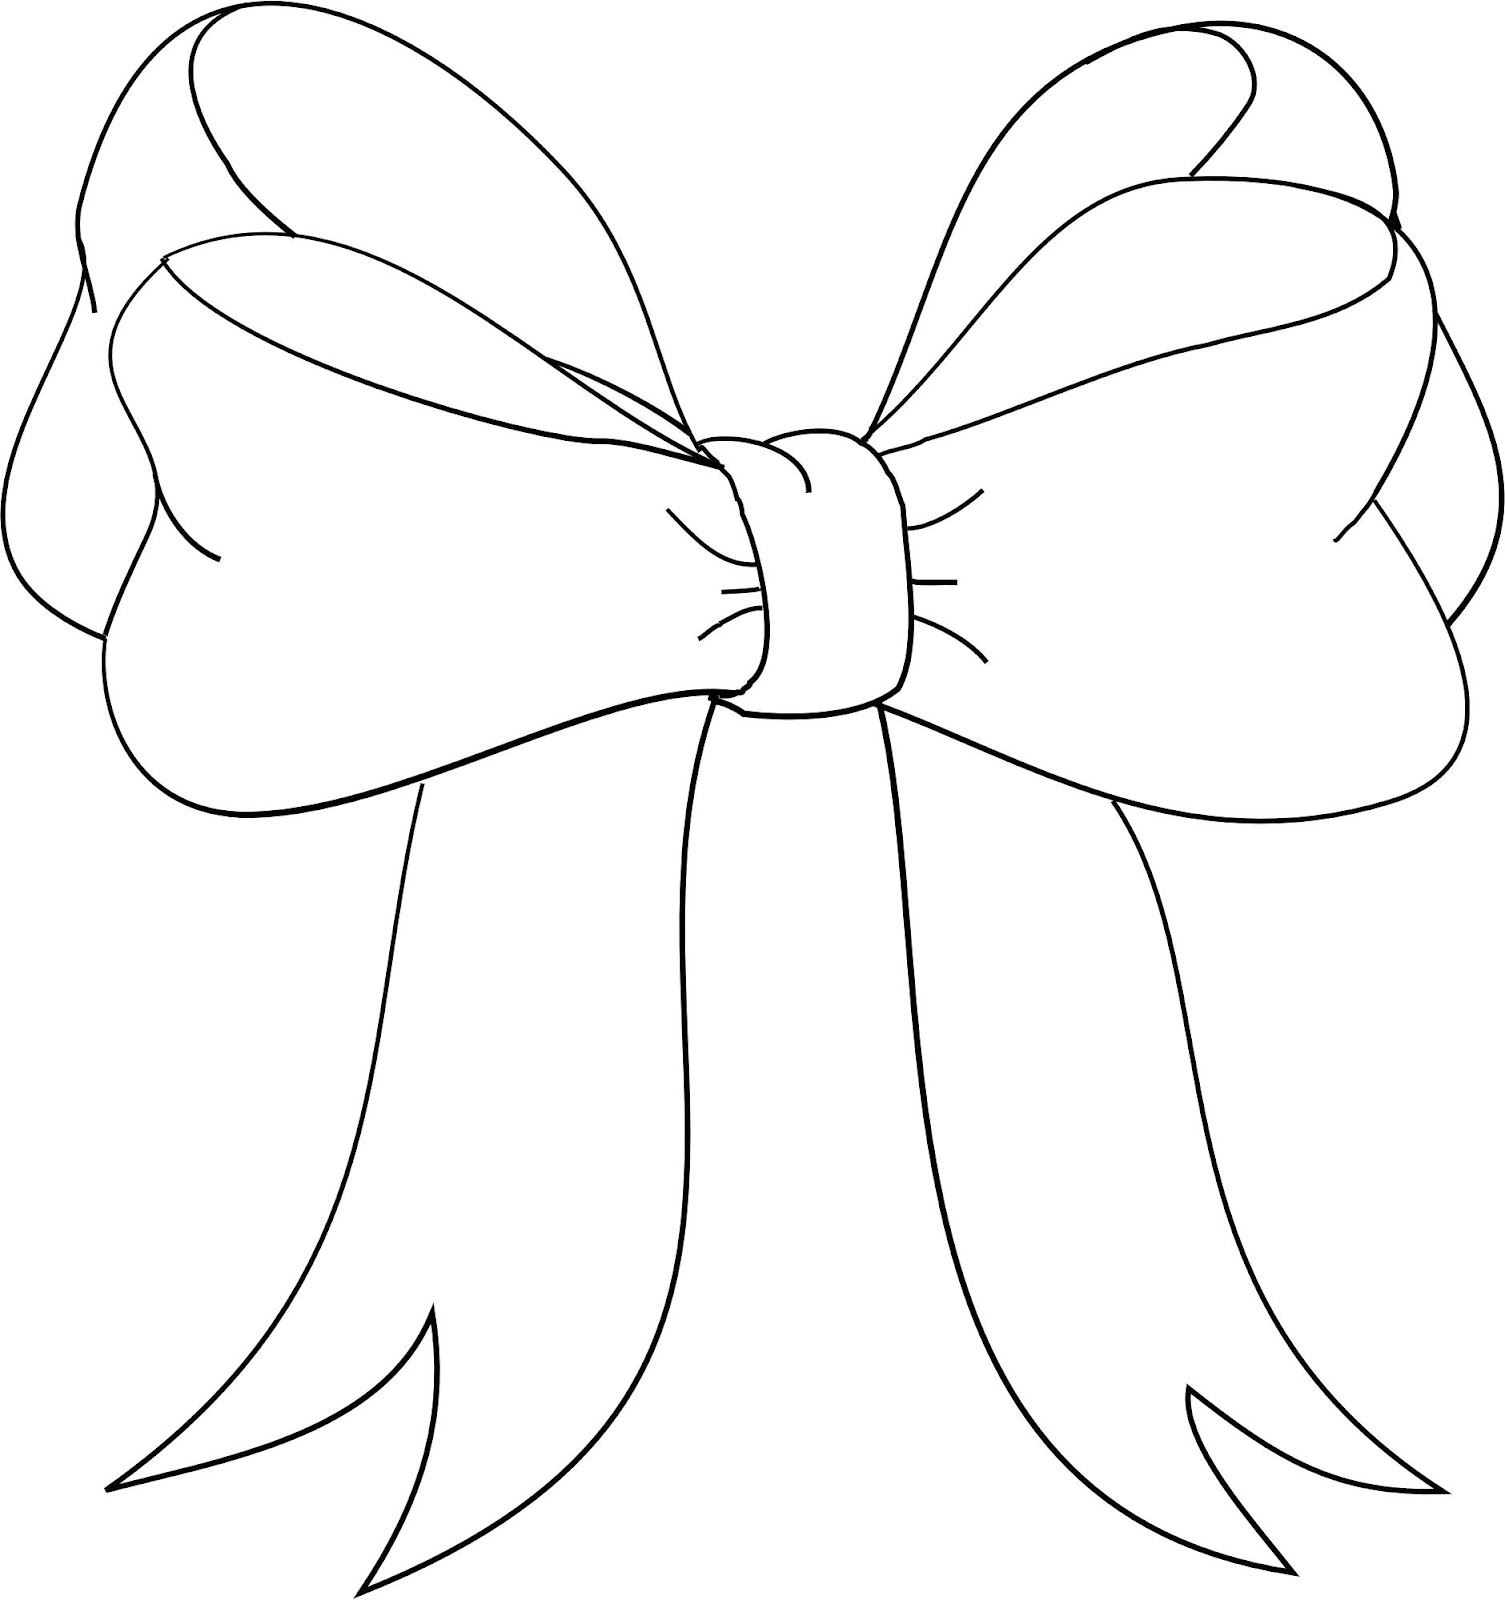 How To Draw A Bow Tie of the decade Learn more here | howtopencil3